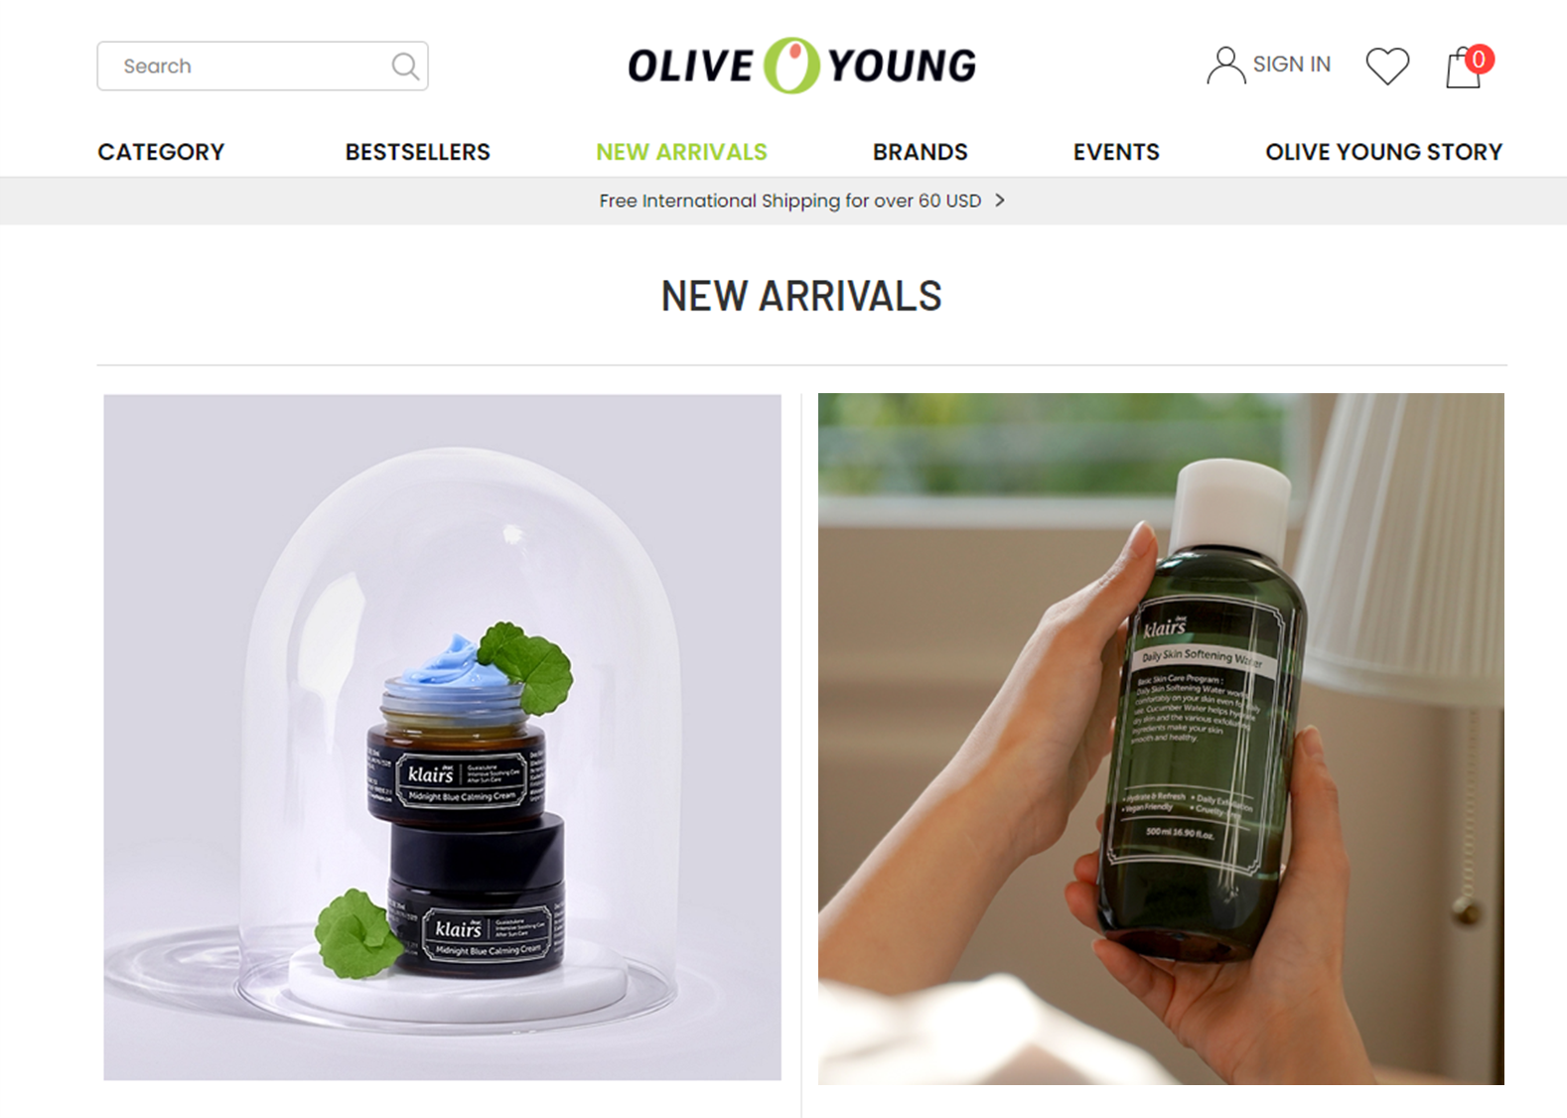 klairs Olive Young